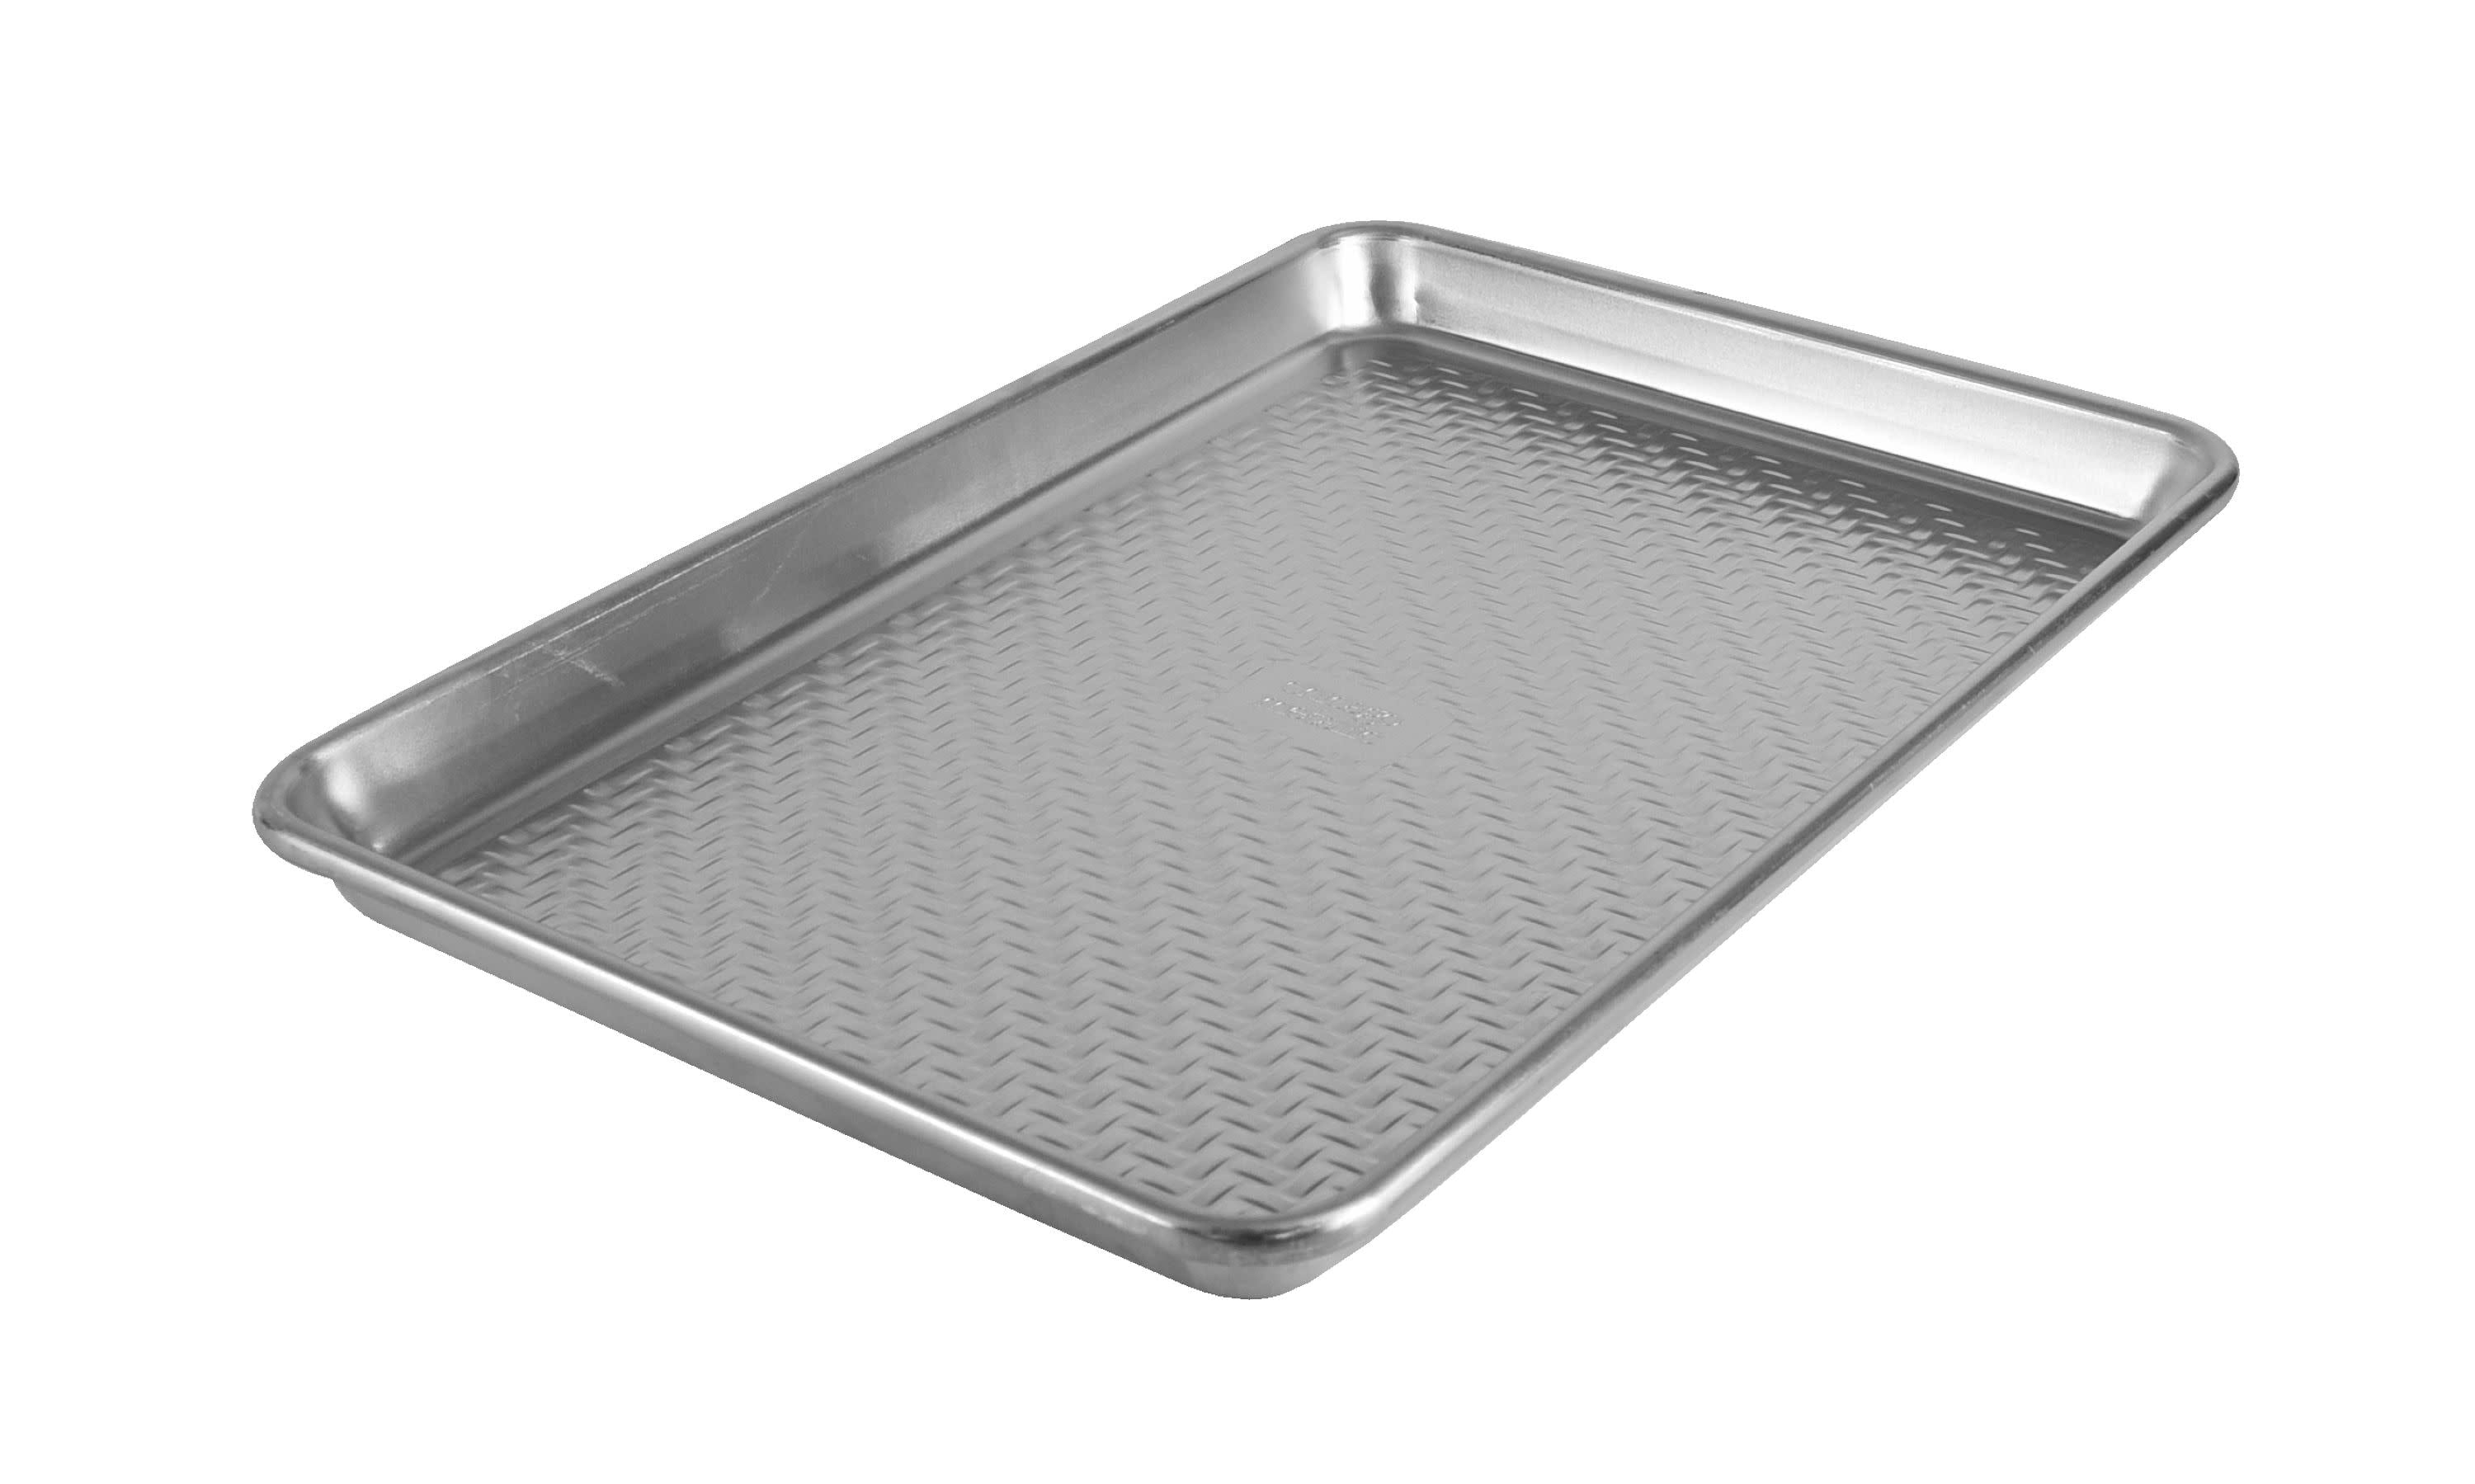 Chicago Metallic Commercial II Small Jelly Roll Pan, 13 x 9.5 in - QFC